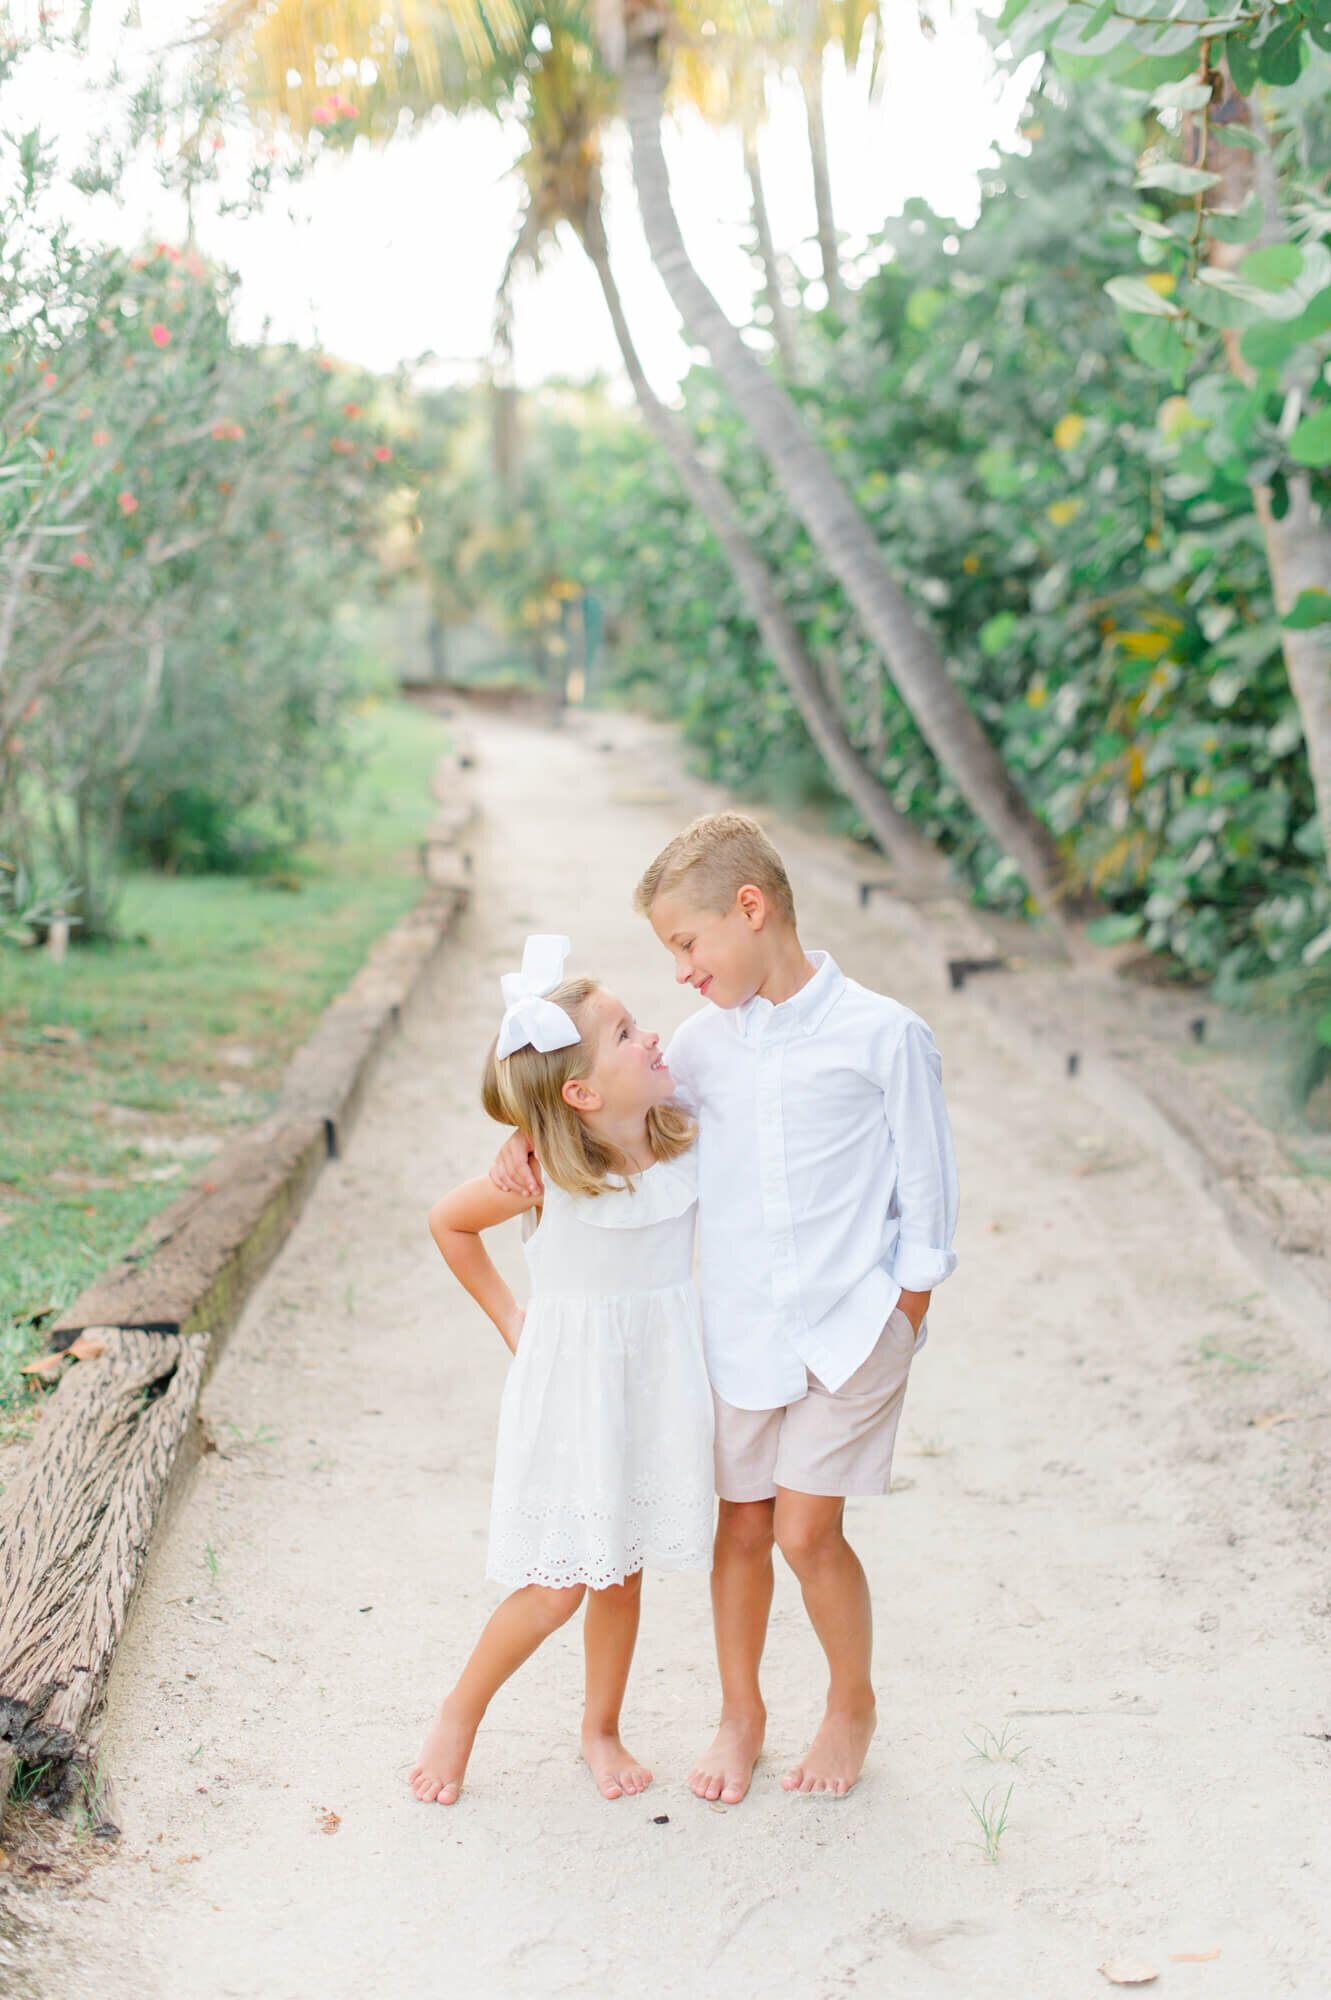 the cutest brother and sister smiling at each other on a beach path in Florida